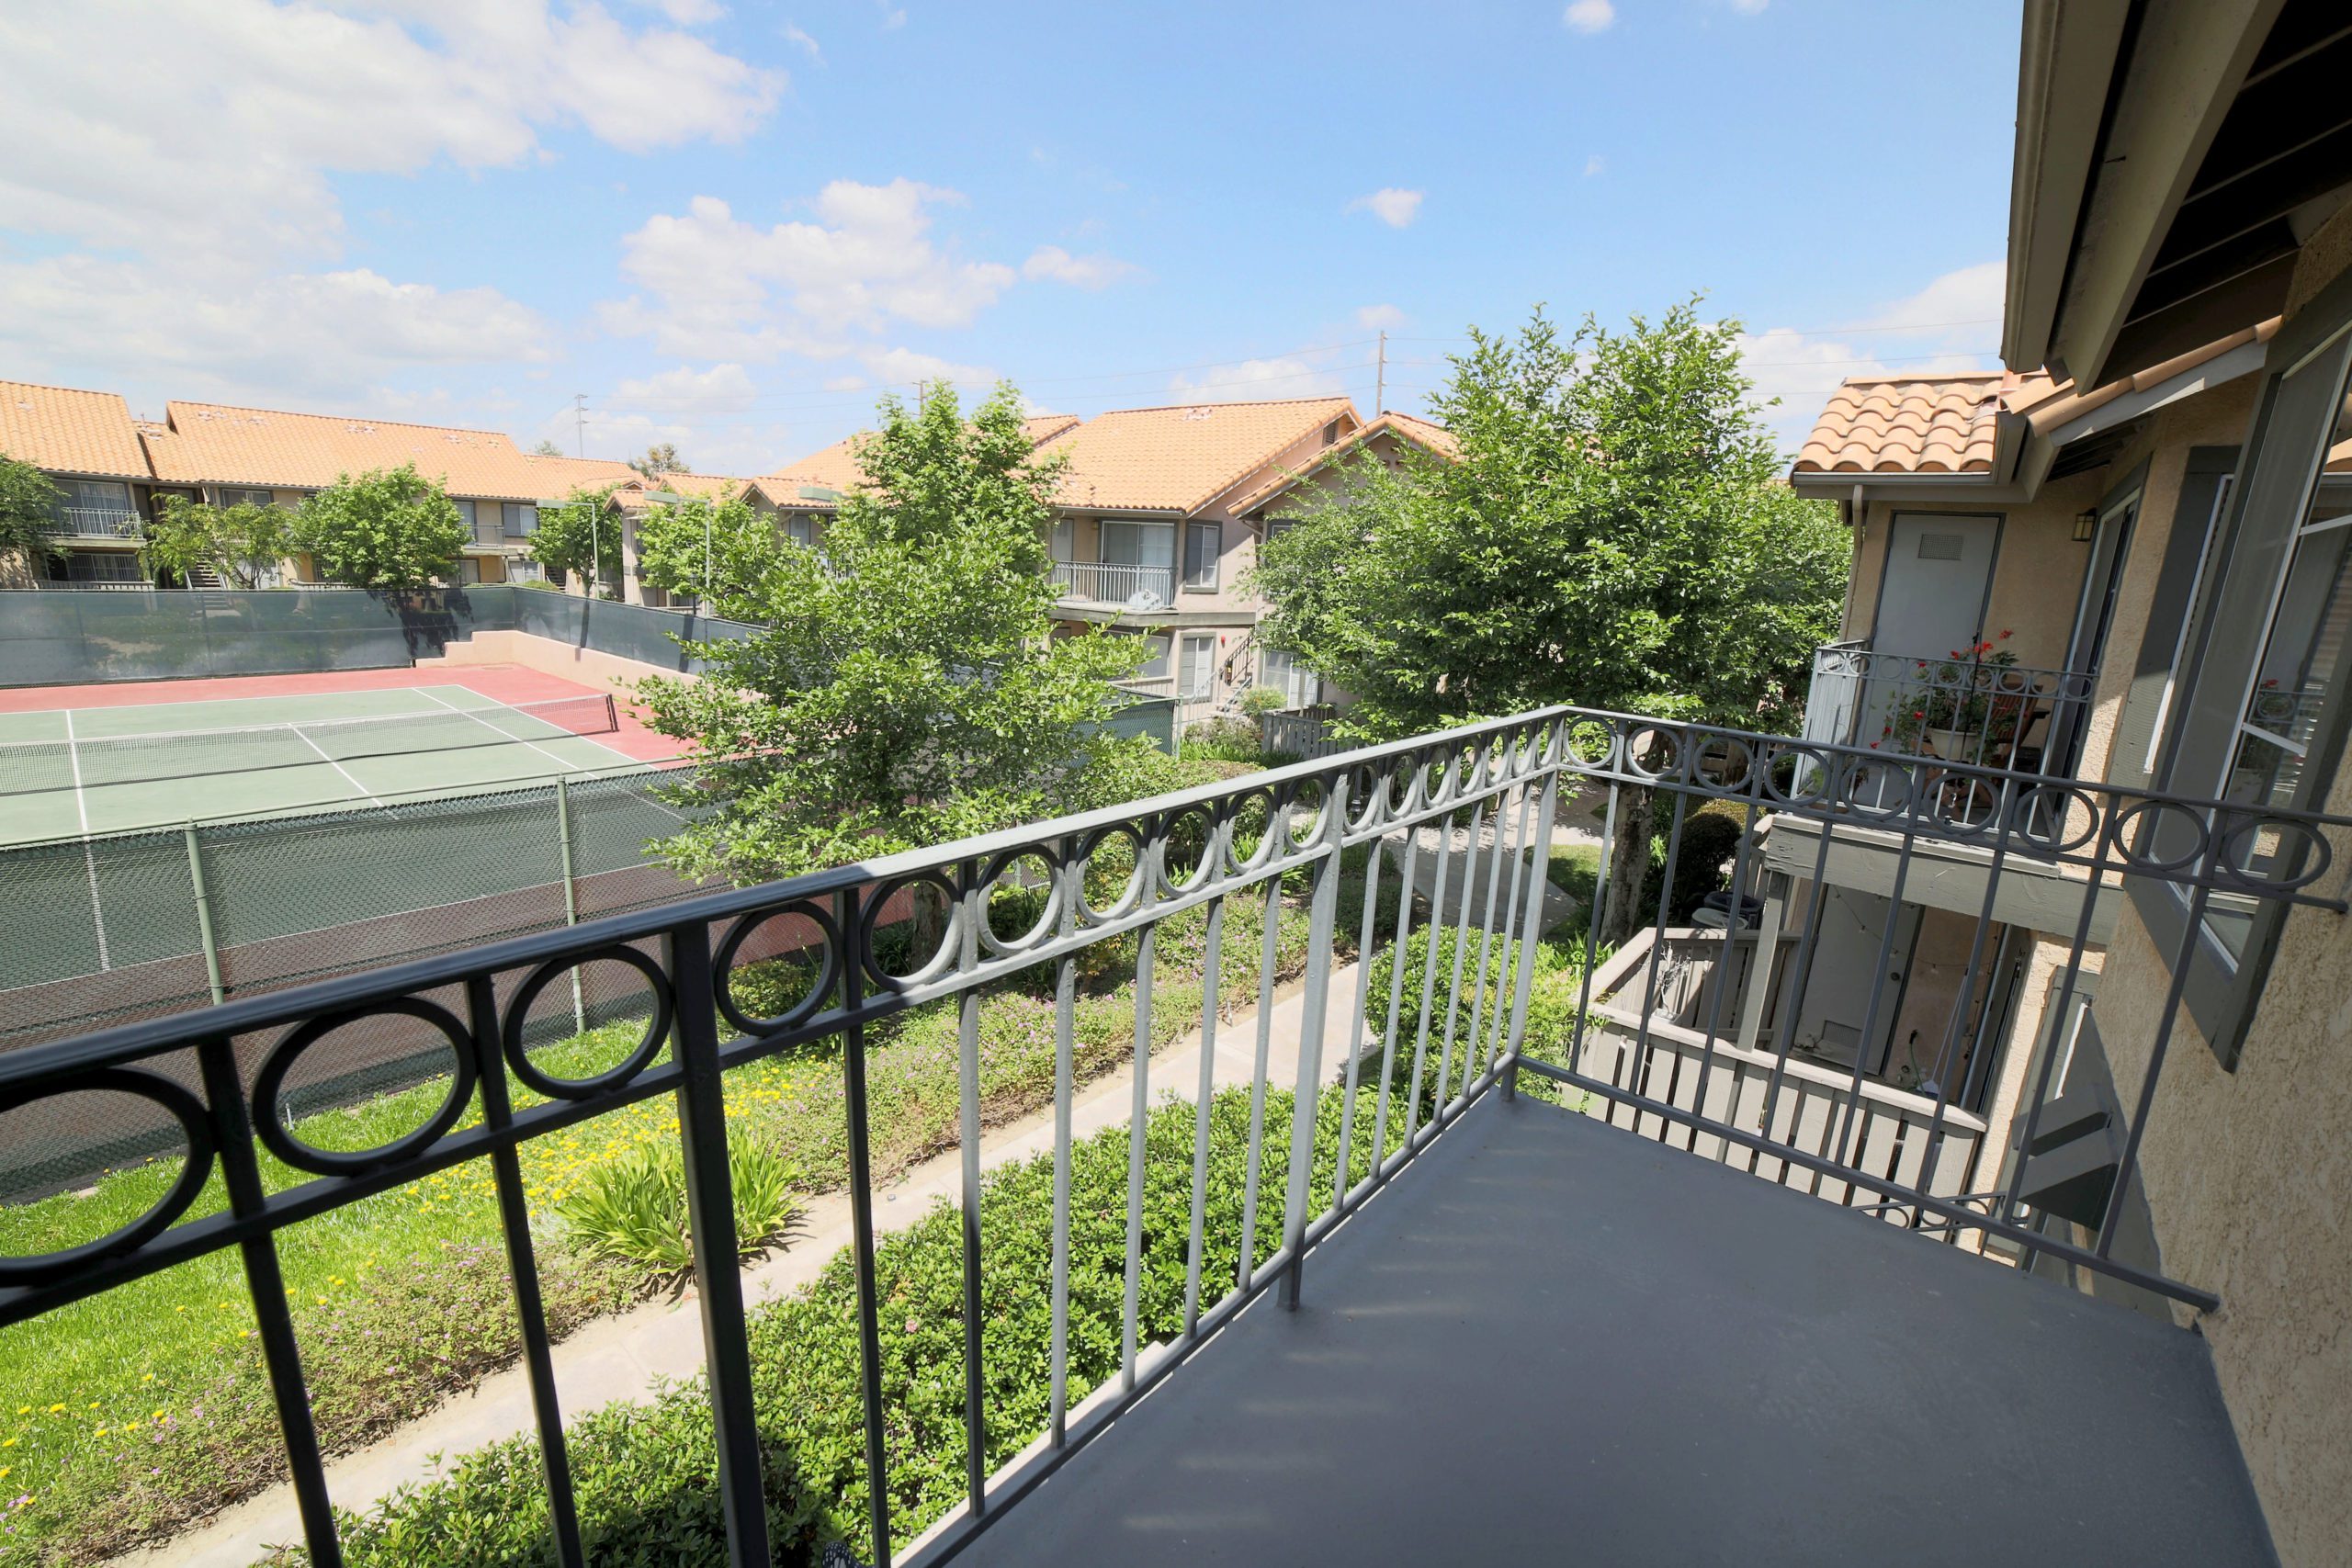 One Bedroom Apartments in Anaheim CA - Le Med - Balcony with a Storage Area, Railing, and a View of the Tennis Court